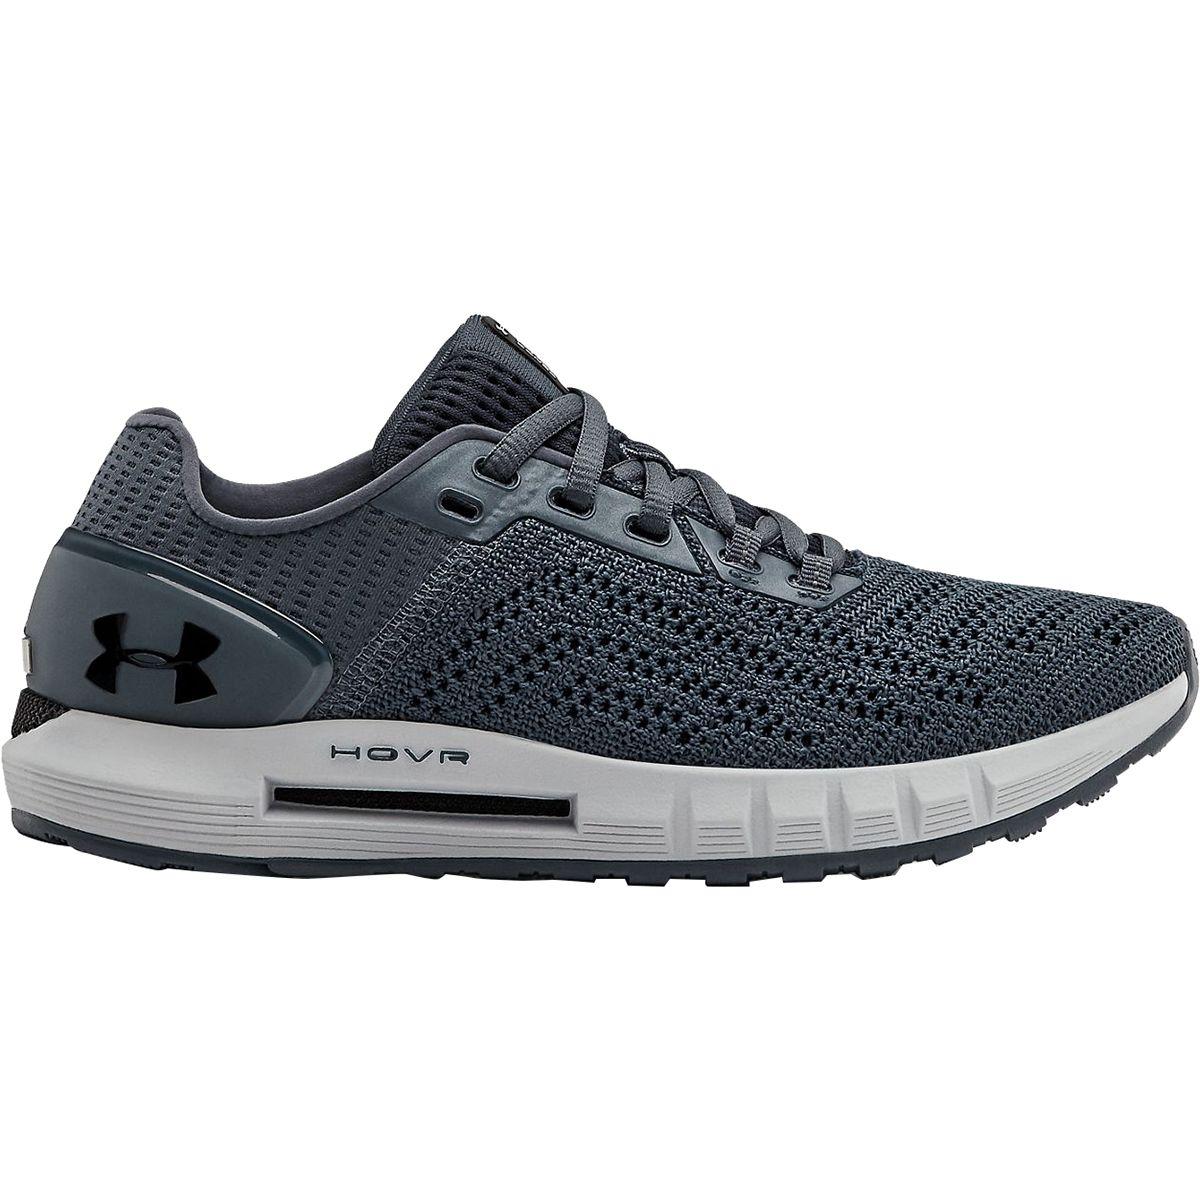 Under Armour Rubber Hovr Sonic 2 Running Shoe in Gray - Lyst